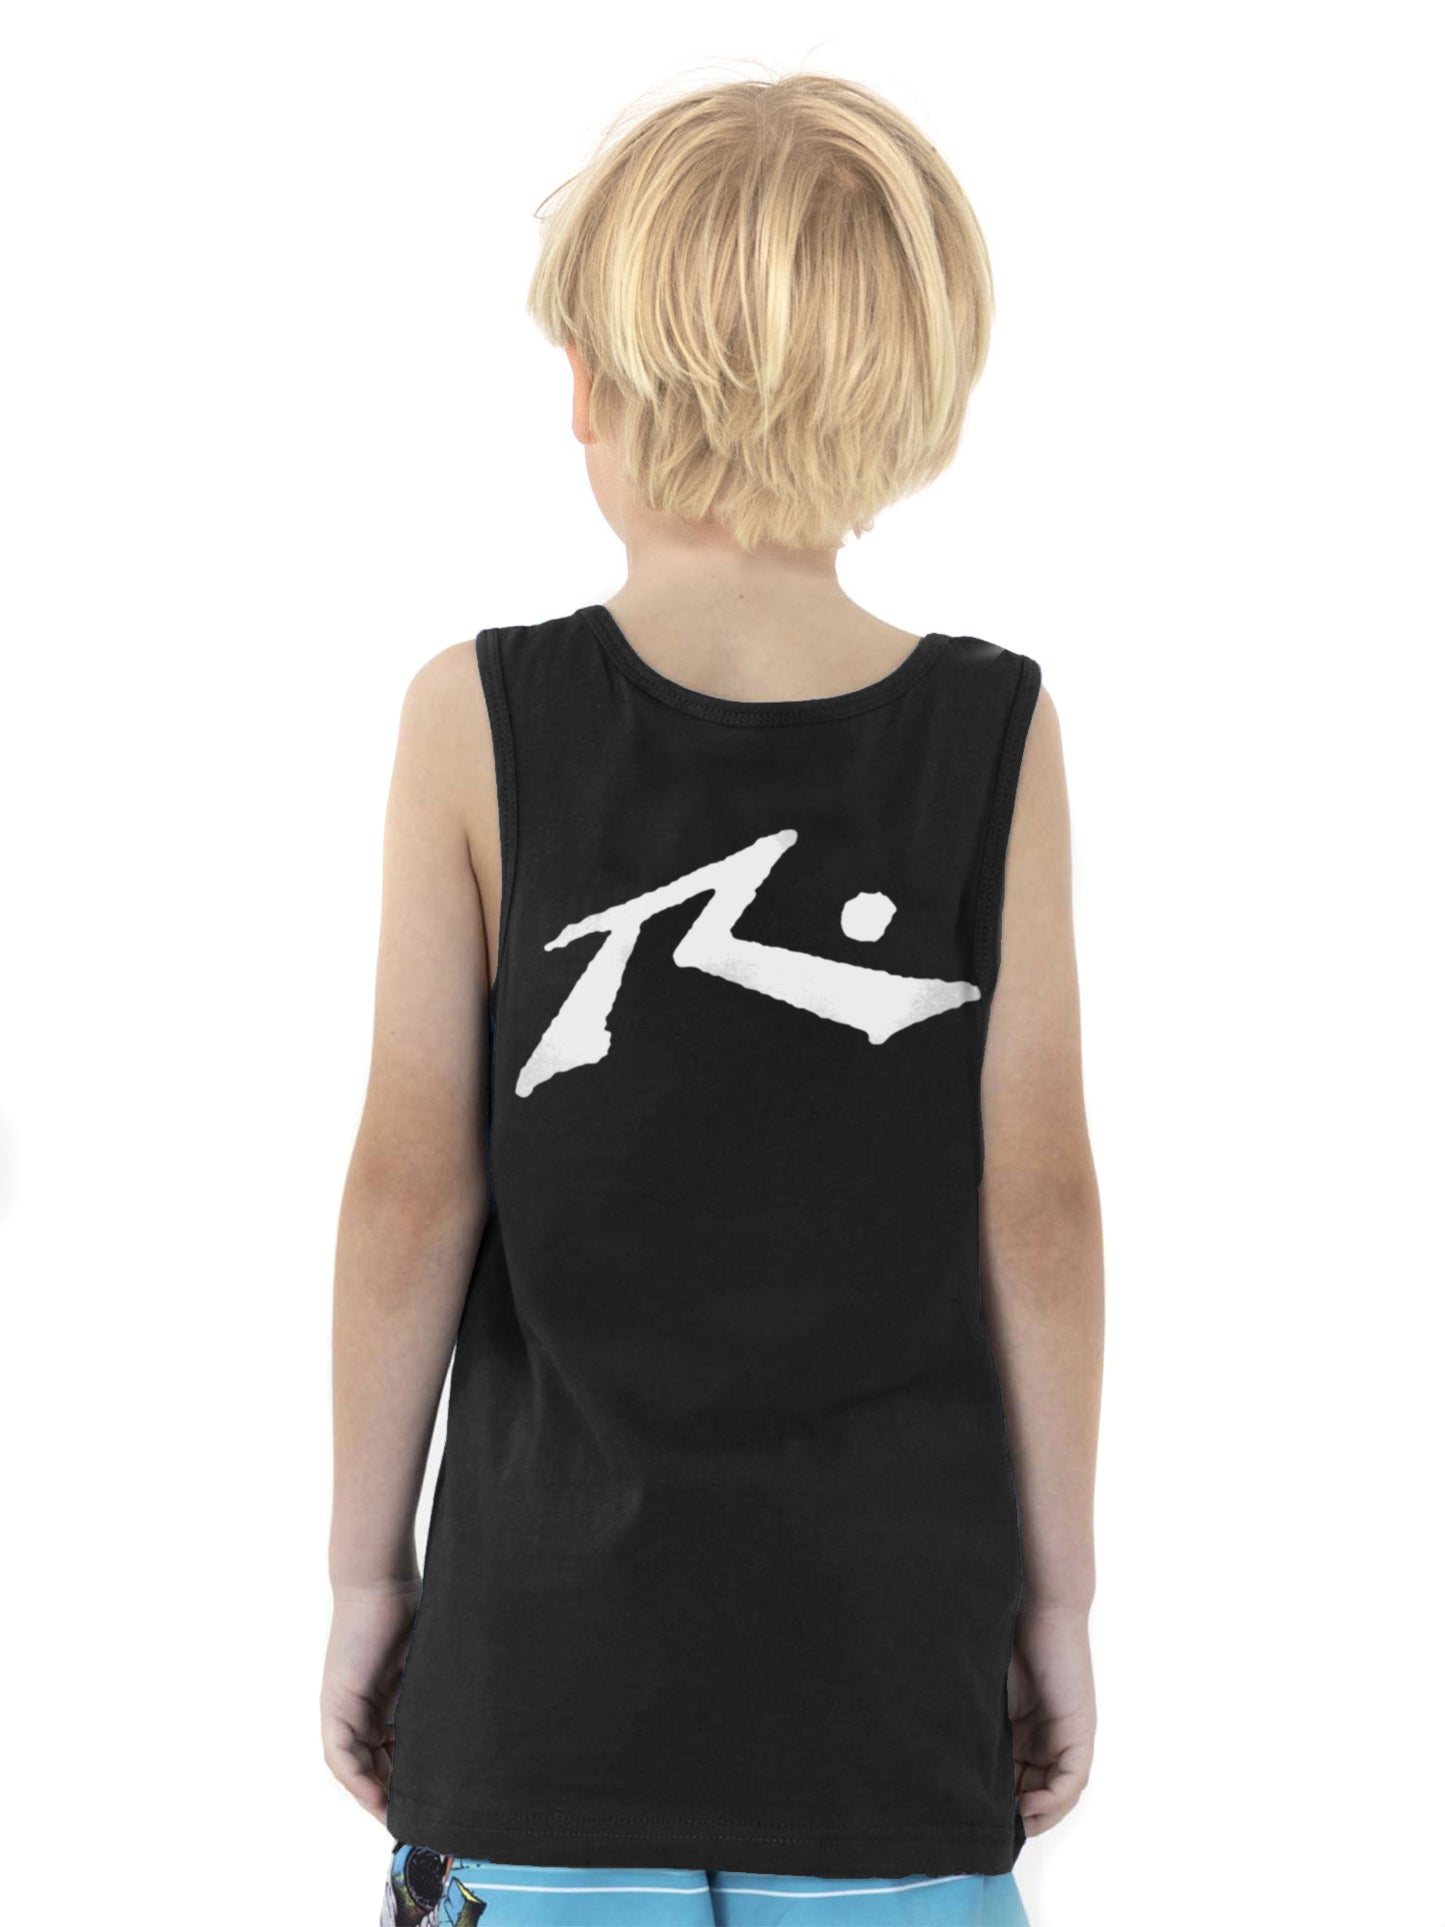 Musculosa Competition Runts